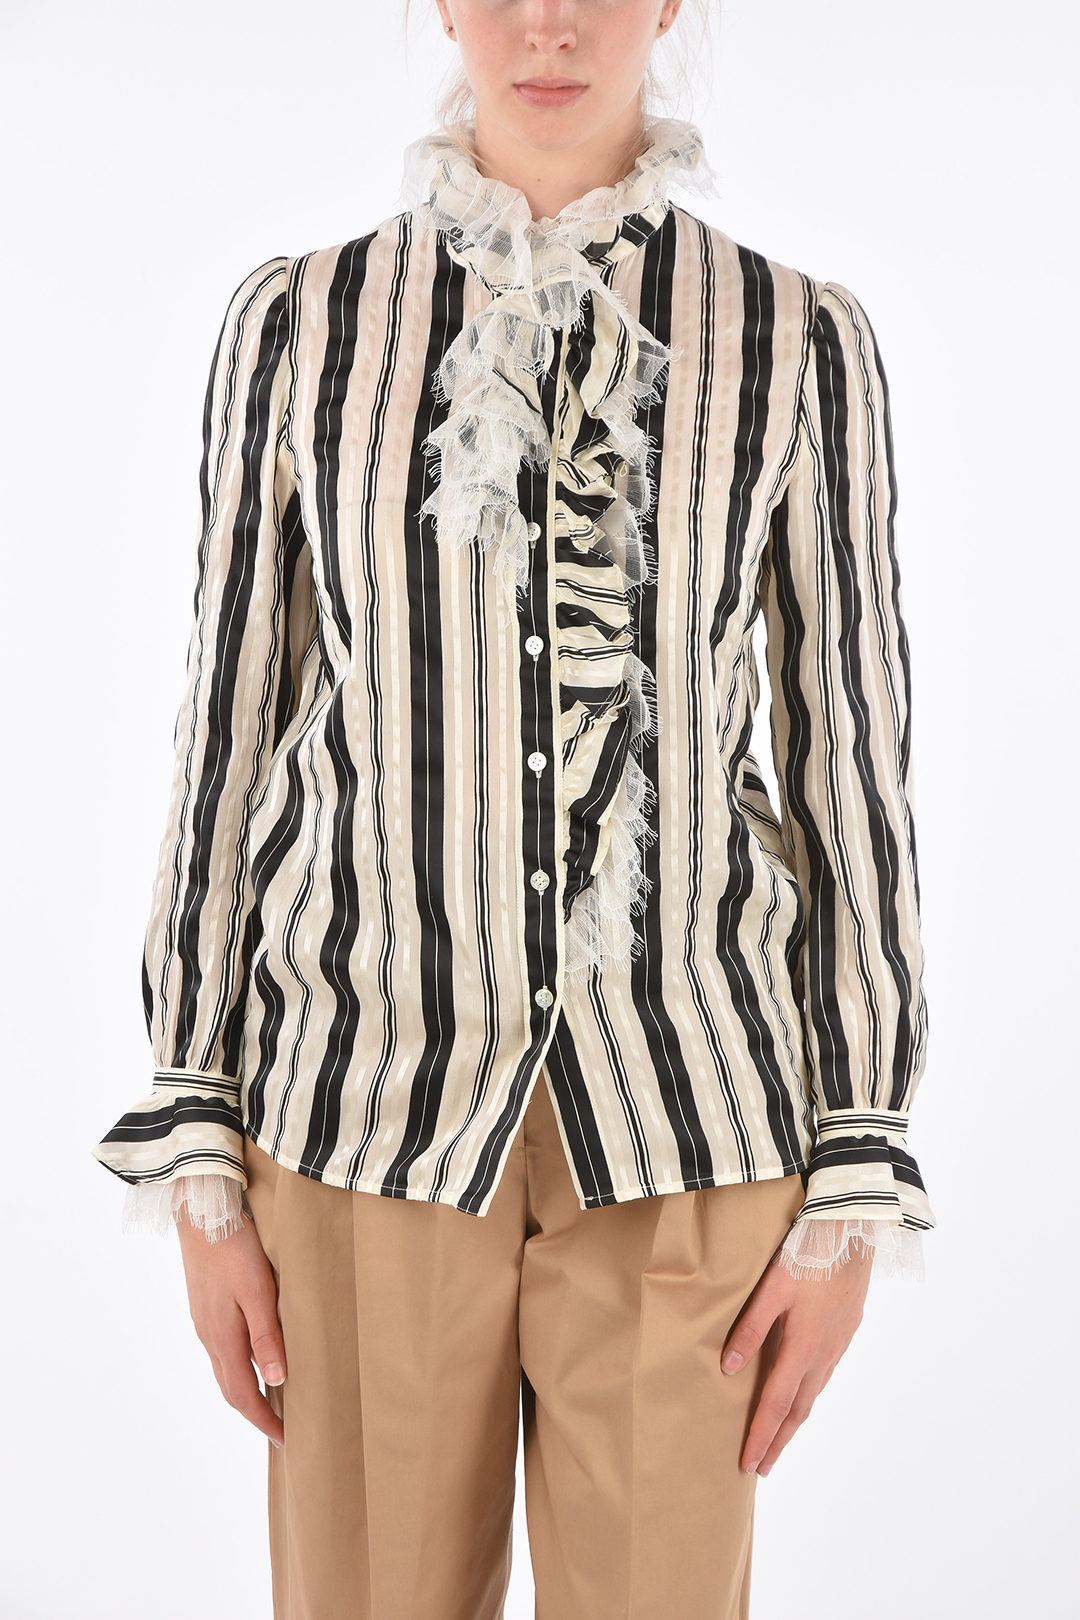 Tory Burch Striped Shirt with Tulle Application women - Glamood Outlet